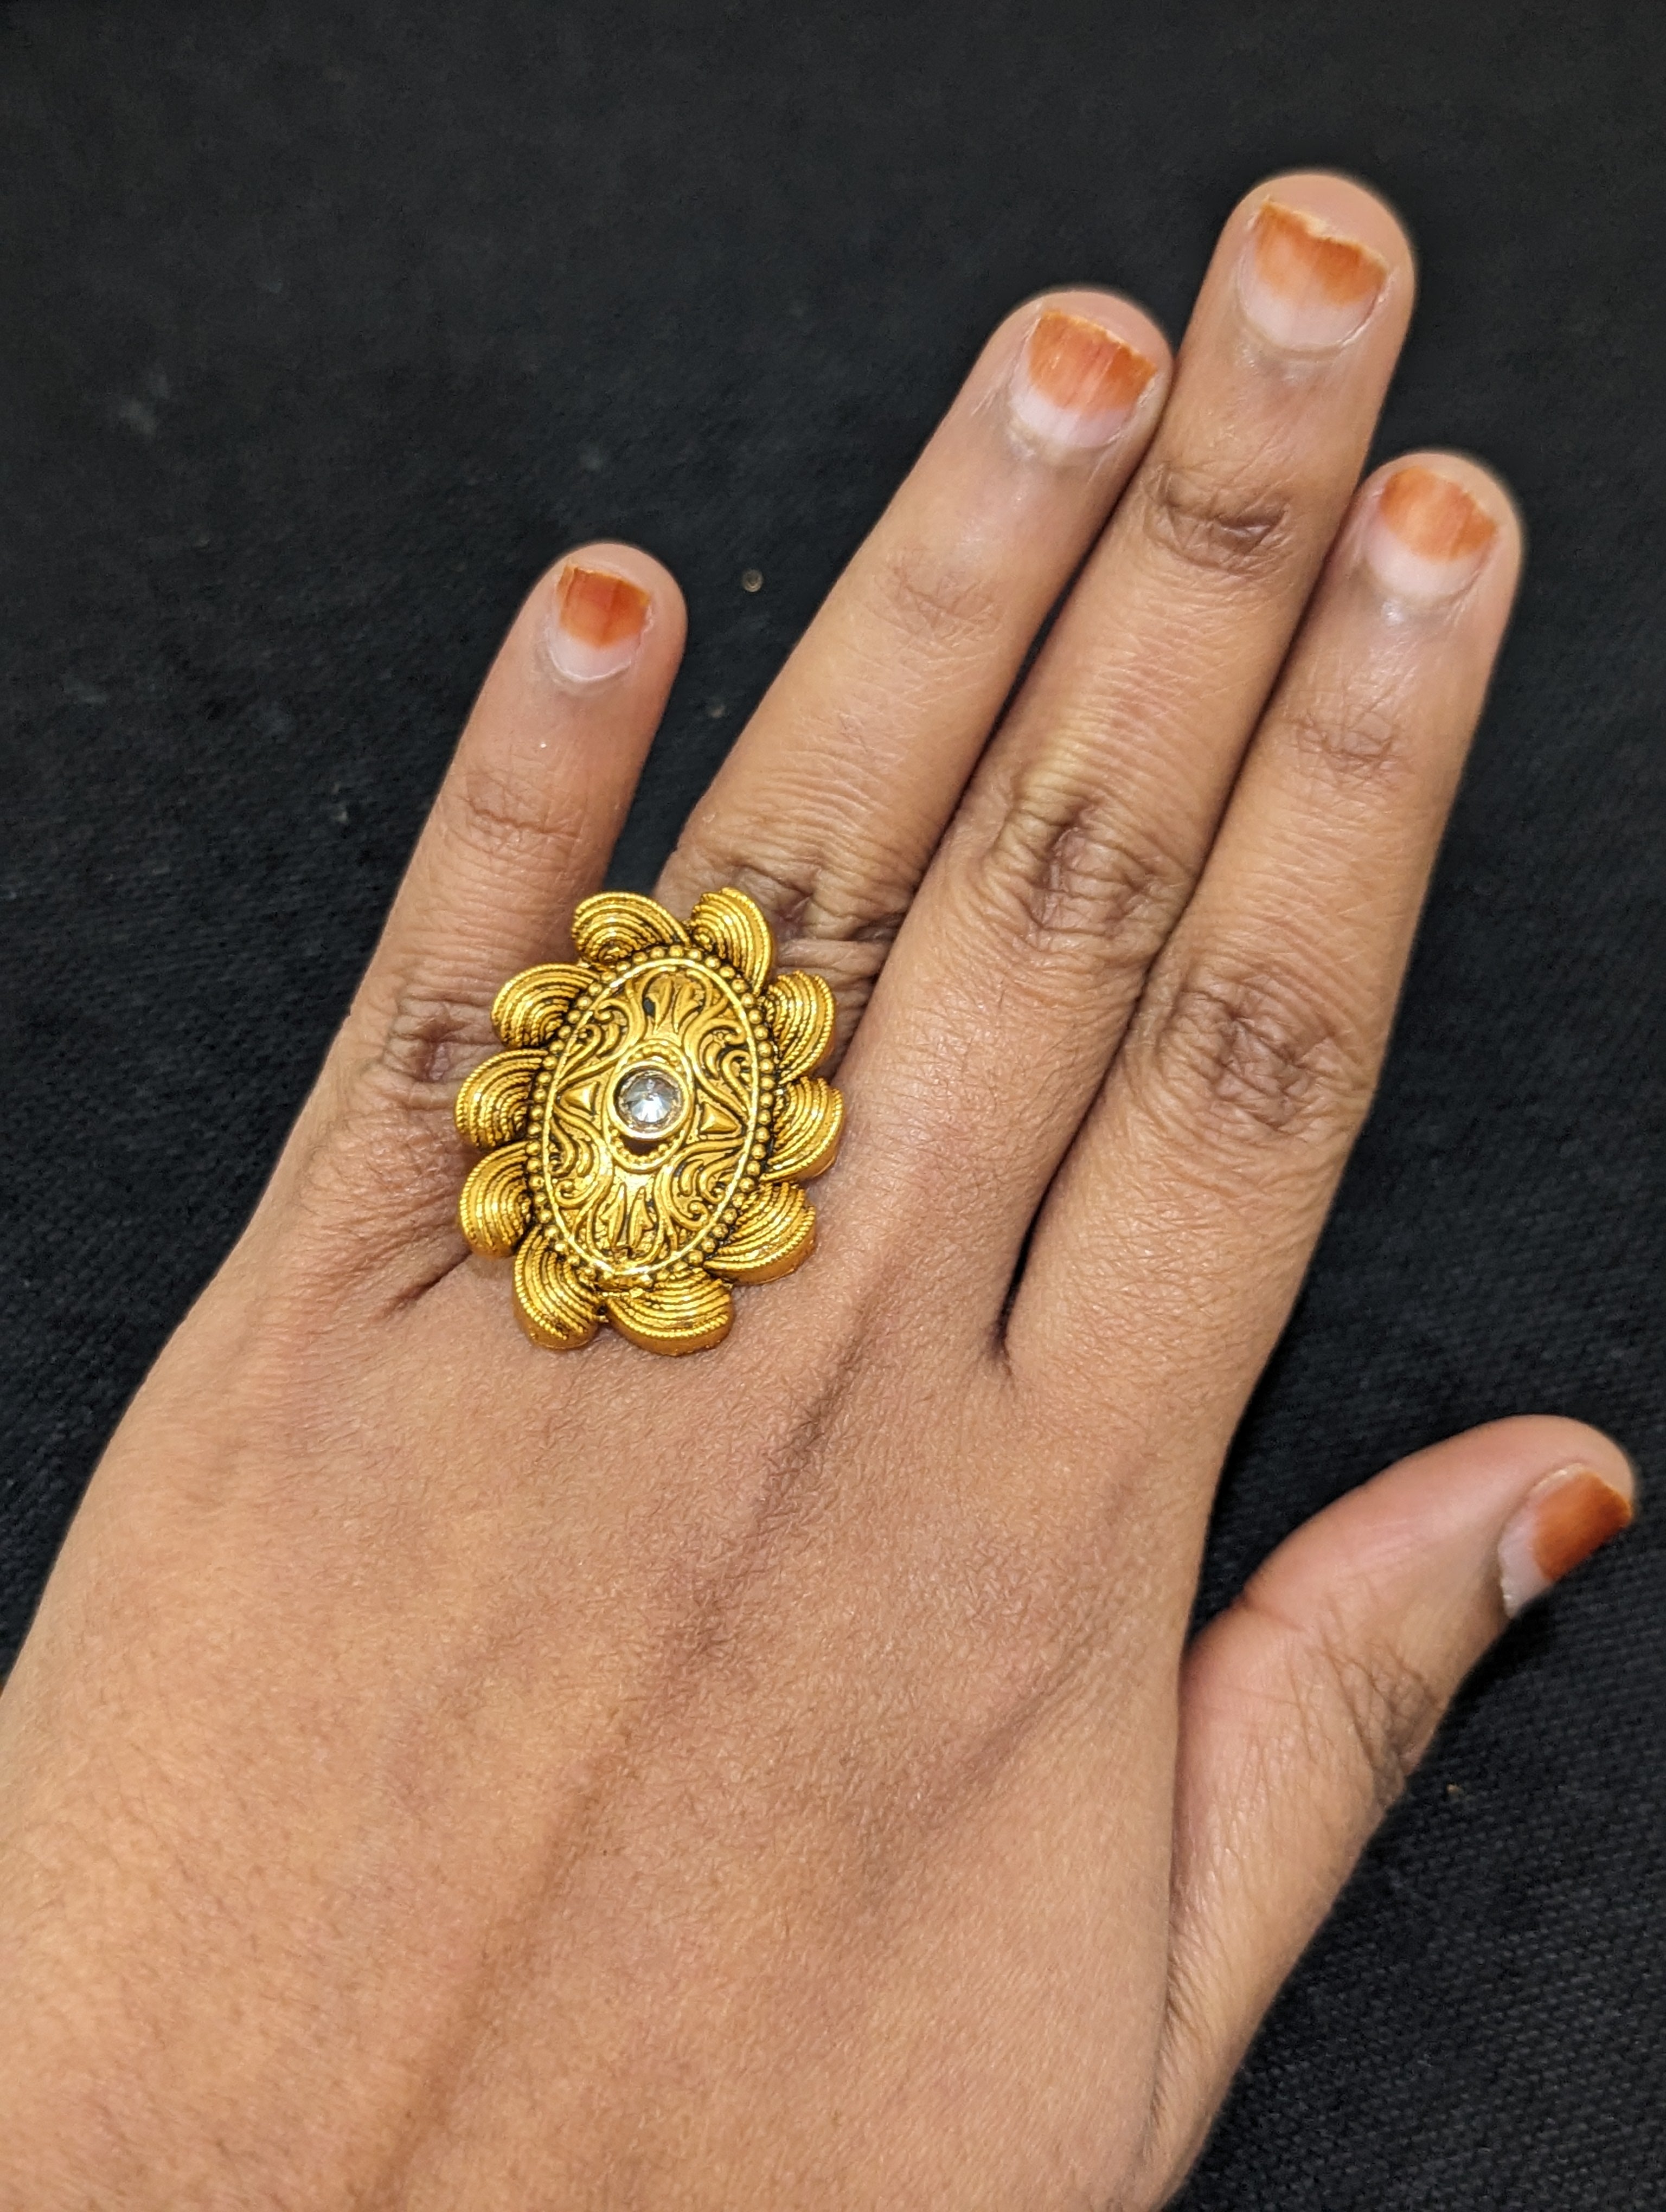 SPE Gold - Traditional Gold Ring